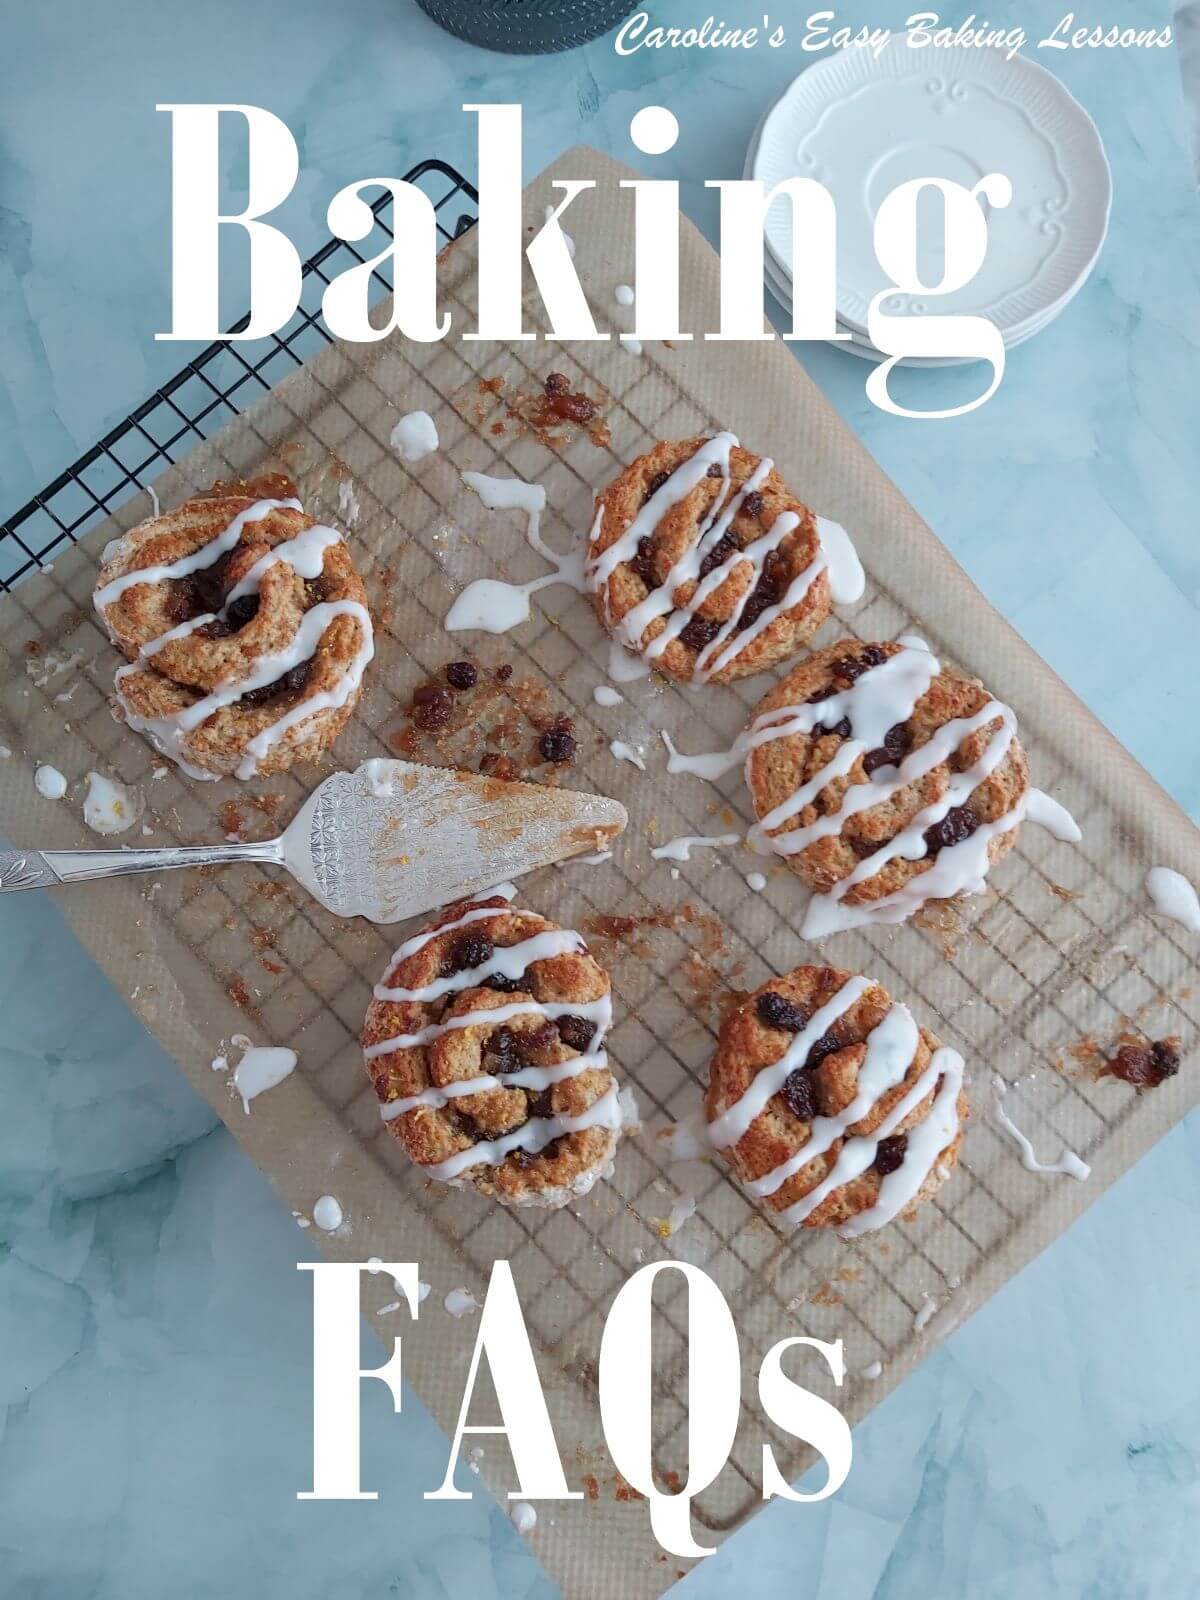 Frequently Asked Baking Questions (FAQs)